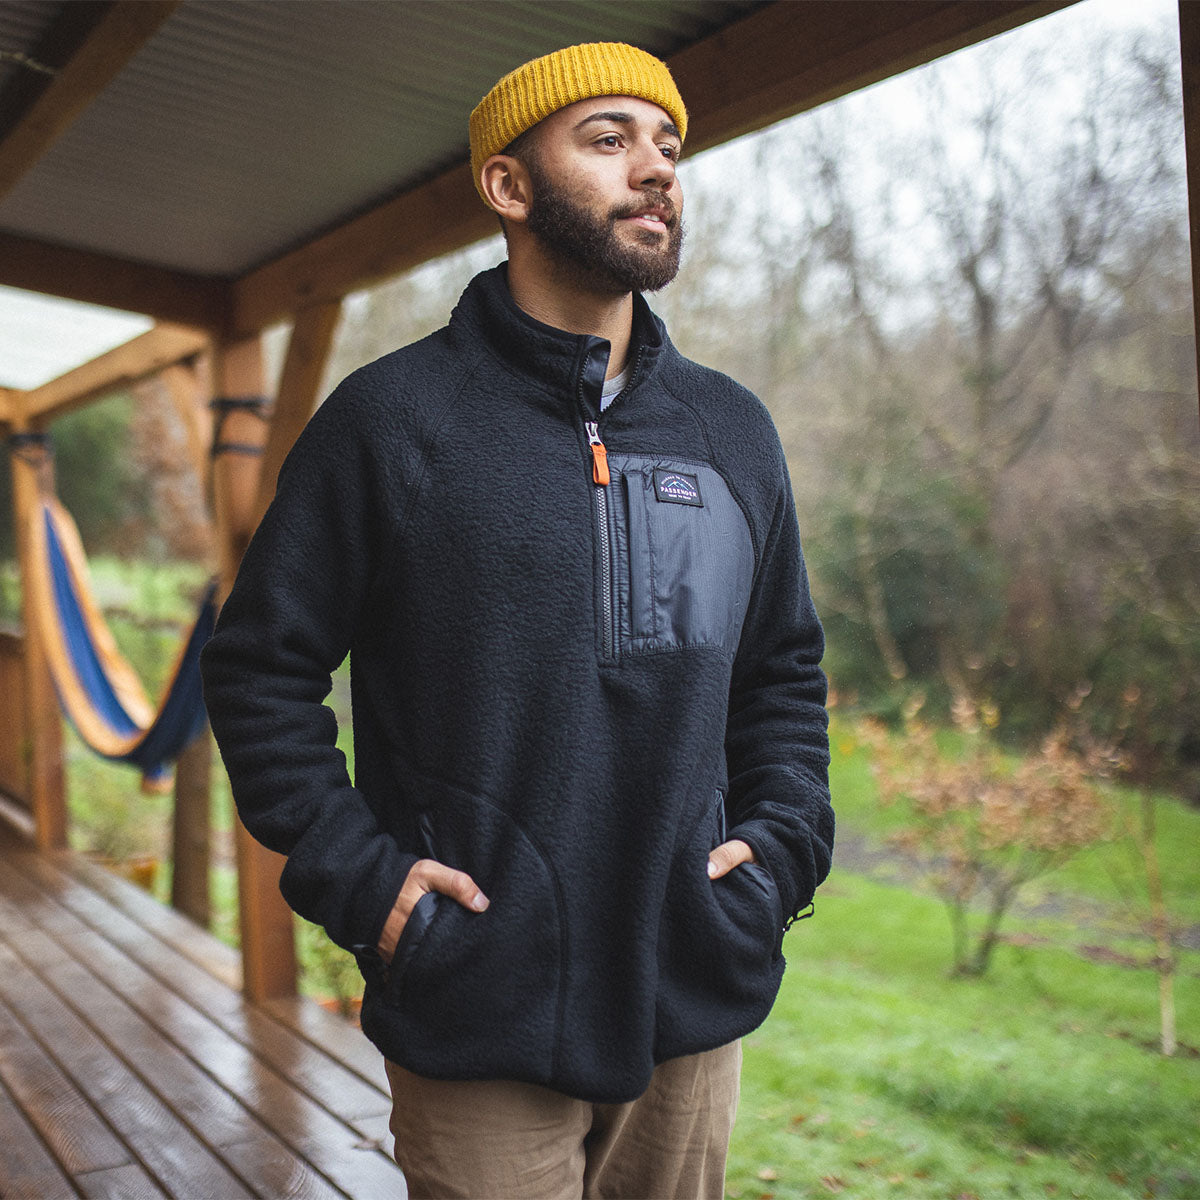 Unlock Wilderness' choice in the Passenger Vs Patagonia comparison, the Offgrid Recycled Sherpa 1/4 Zip Fleece by Passenger Clothing